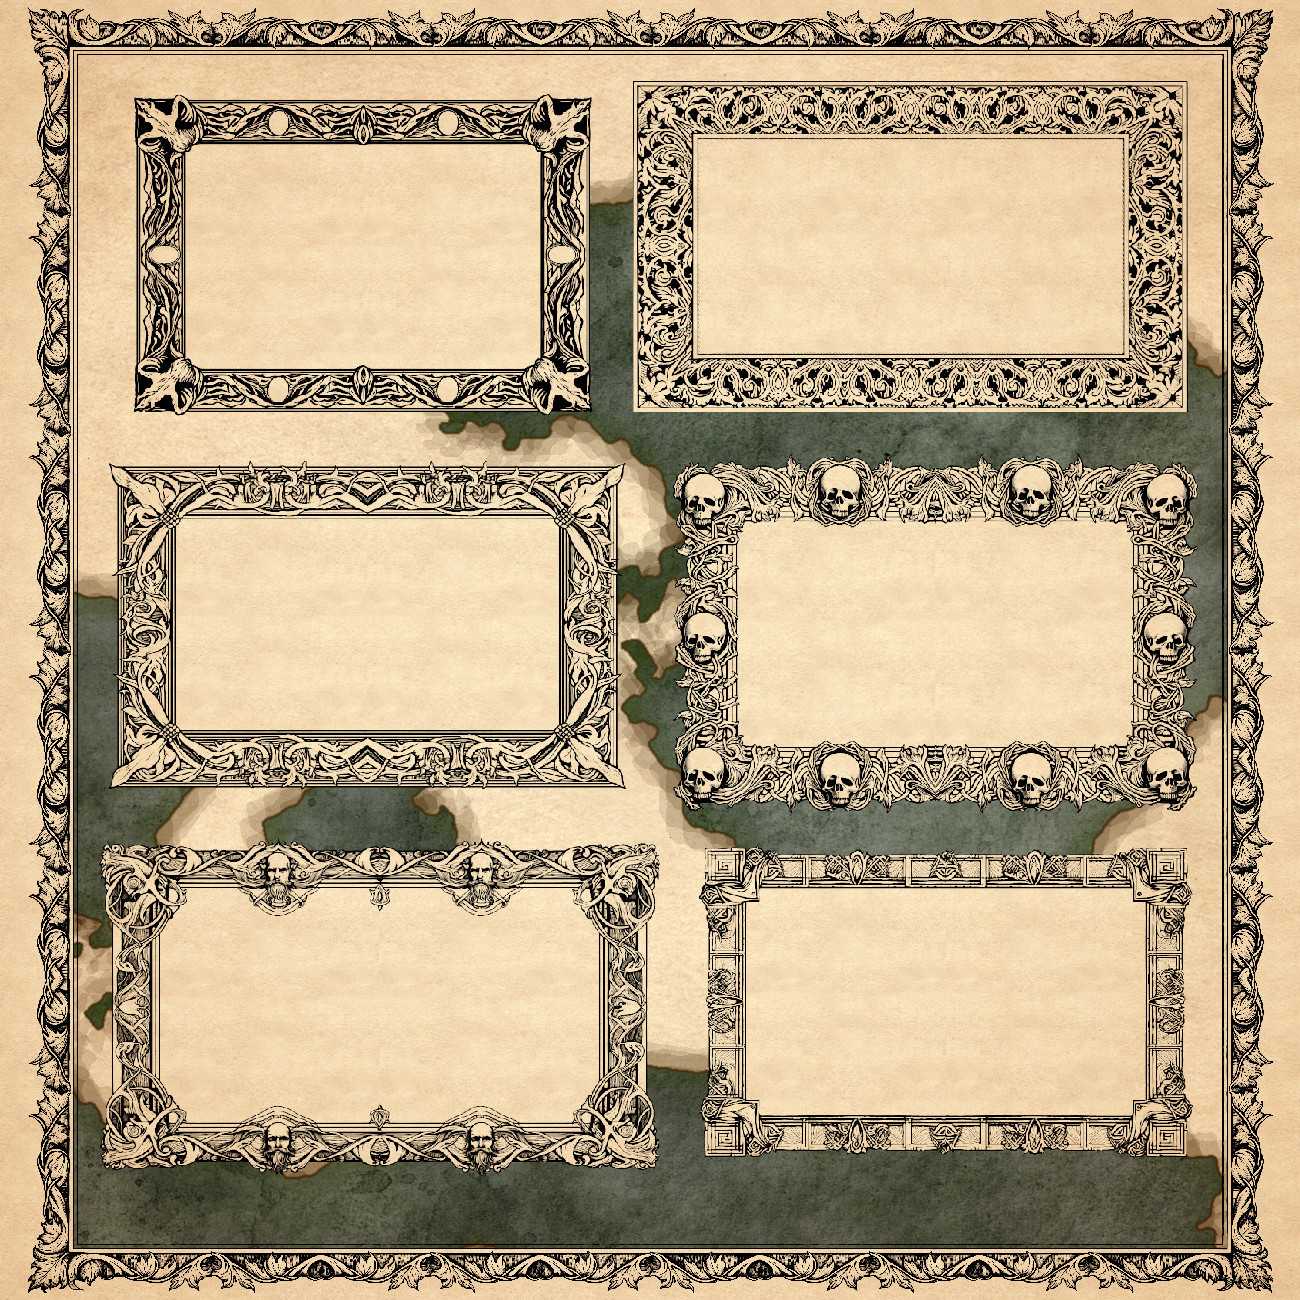 fantasy map textures, decorative ornate frames and text boxes, wonderdraft assets and textures